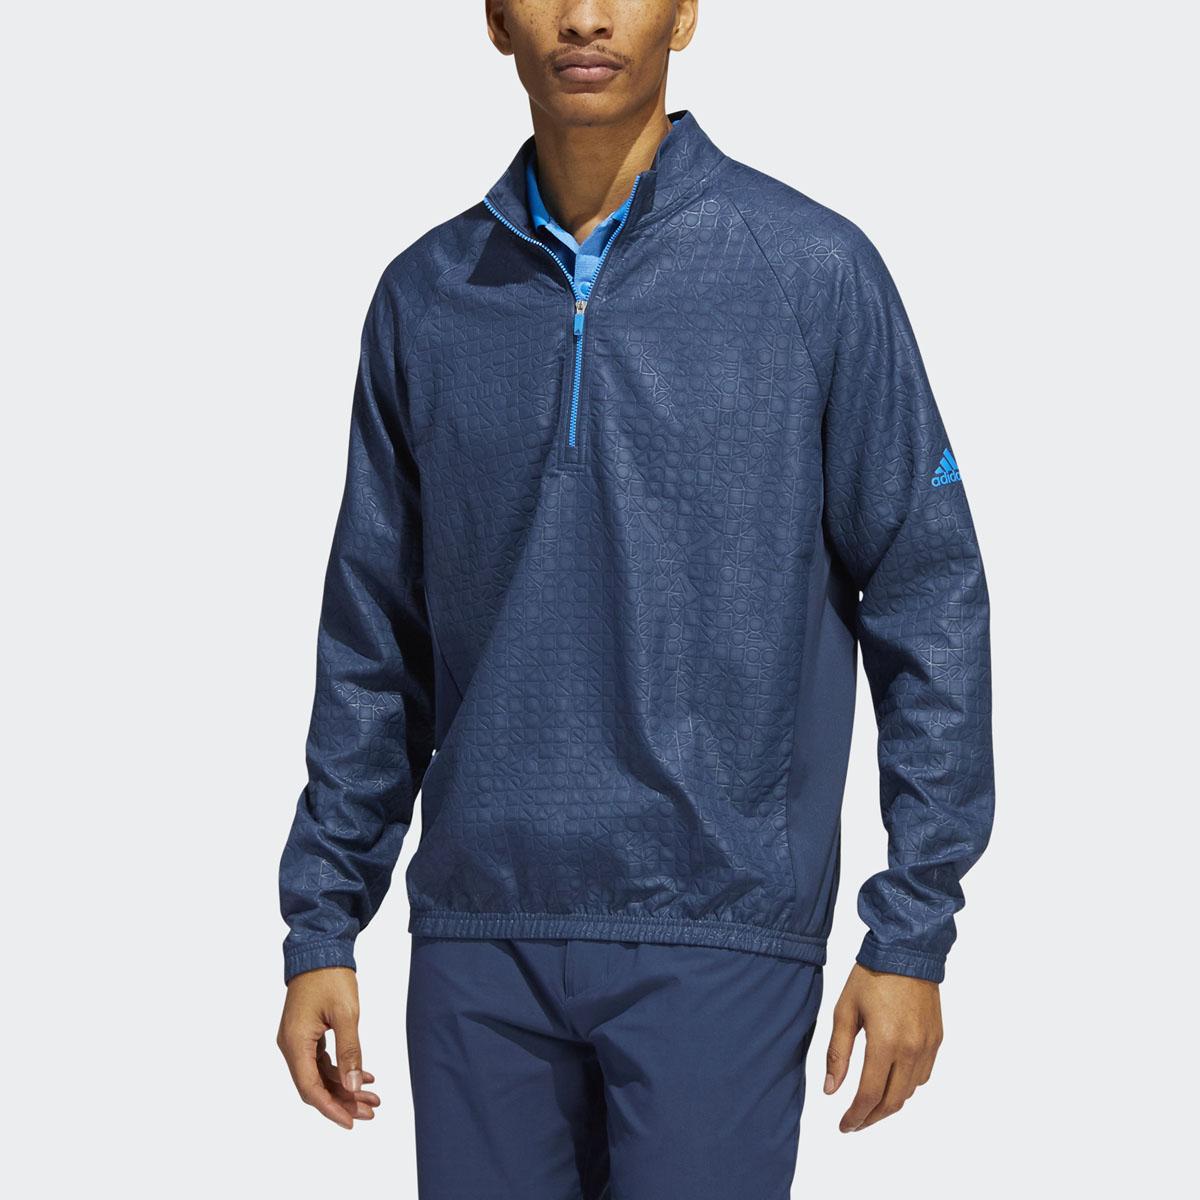 adidas Debossed Quarter-Zip Pullover for $14.40 Shipped